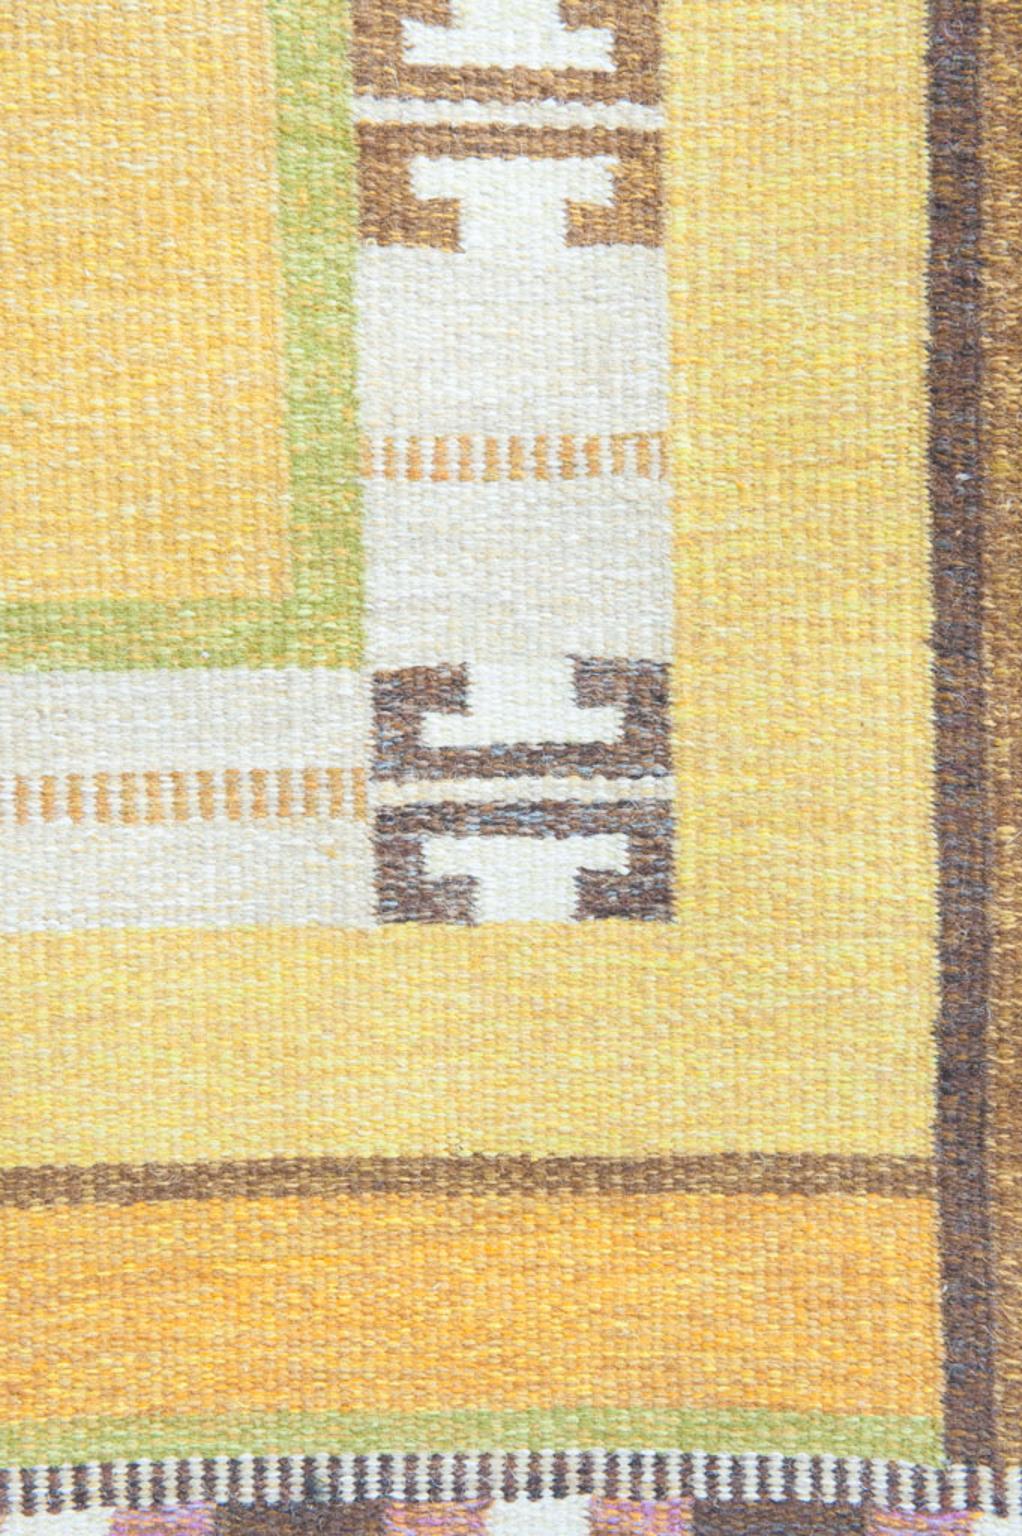 Beautiful vintage handwoven Røllakan, carpet of wool flat-weave with handwowen in a polychrome pattern. Signed IS. Signed IS by Ingegerd Silow (1916-2005). Made mid-1900.

This rug is never washed or cleaned.